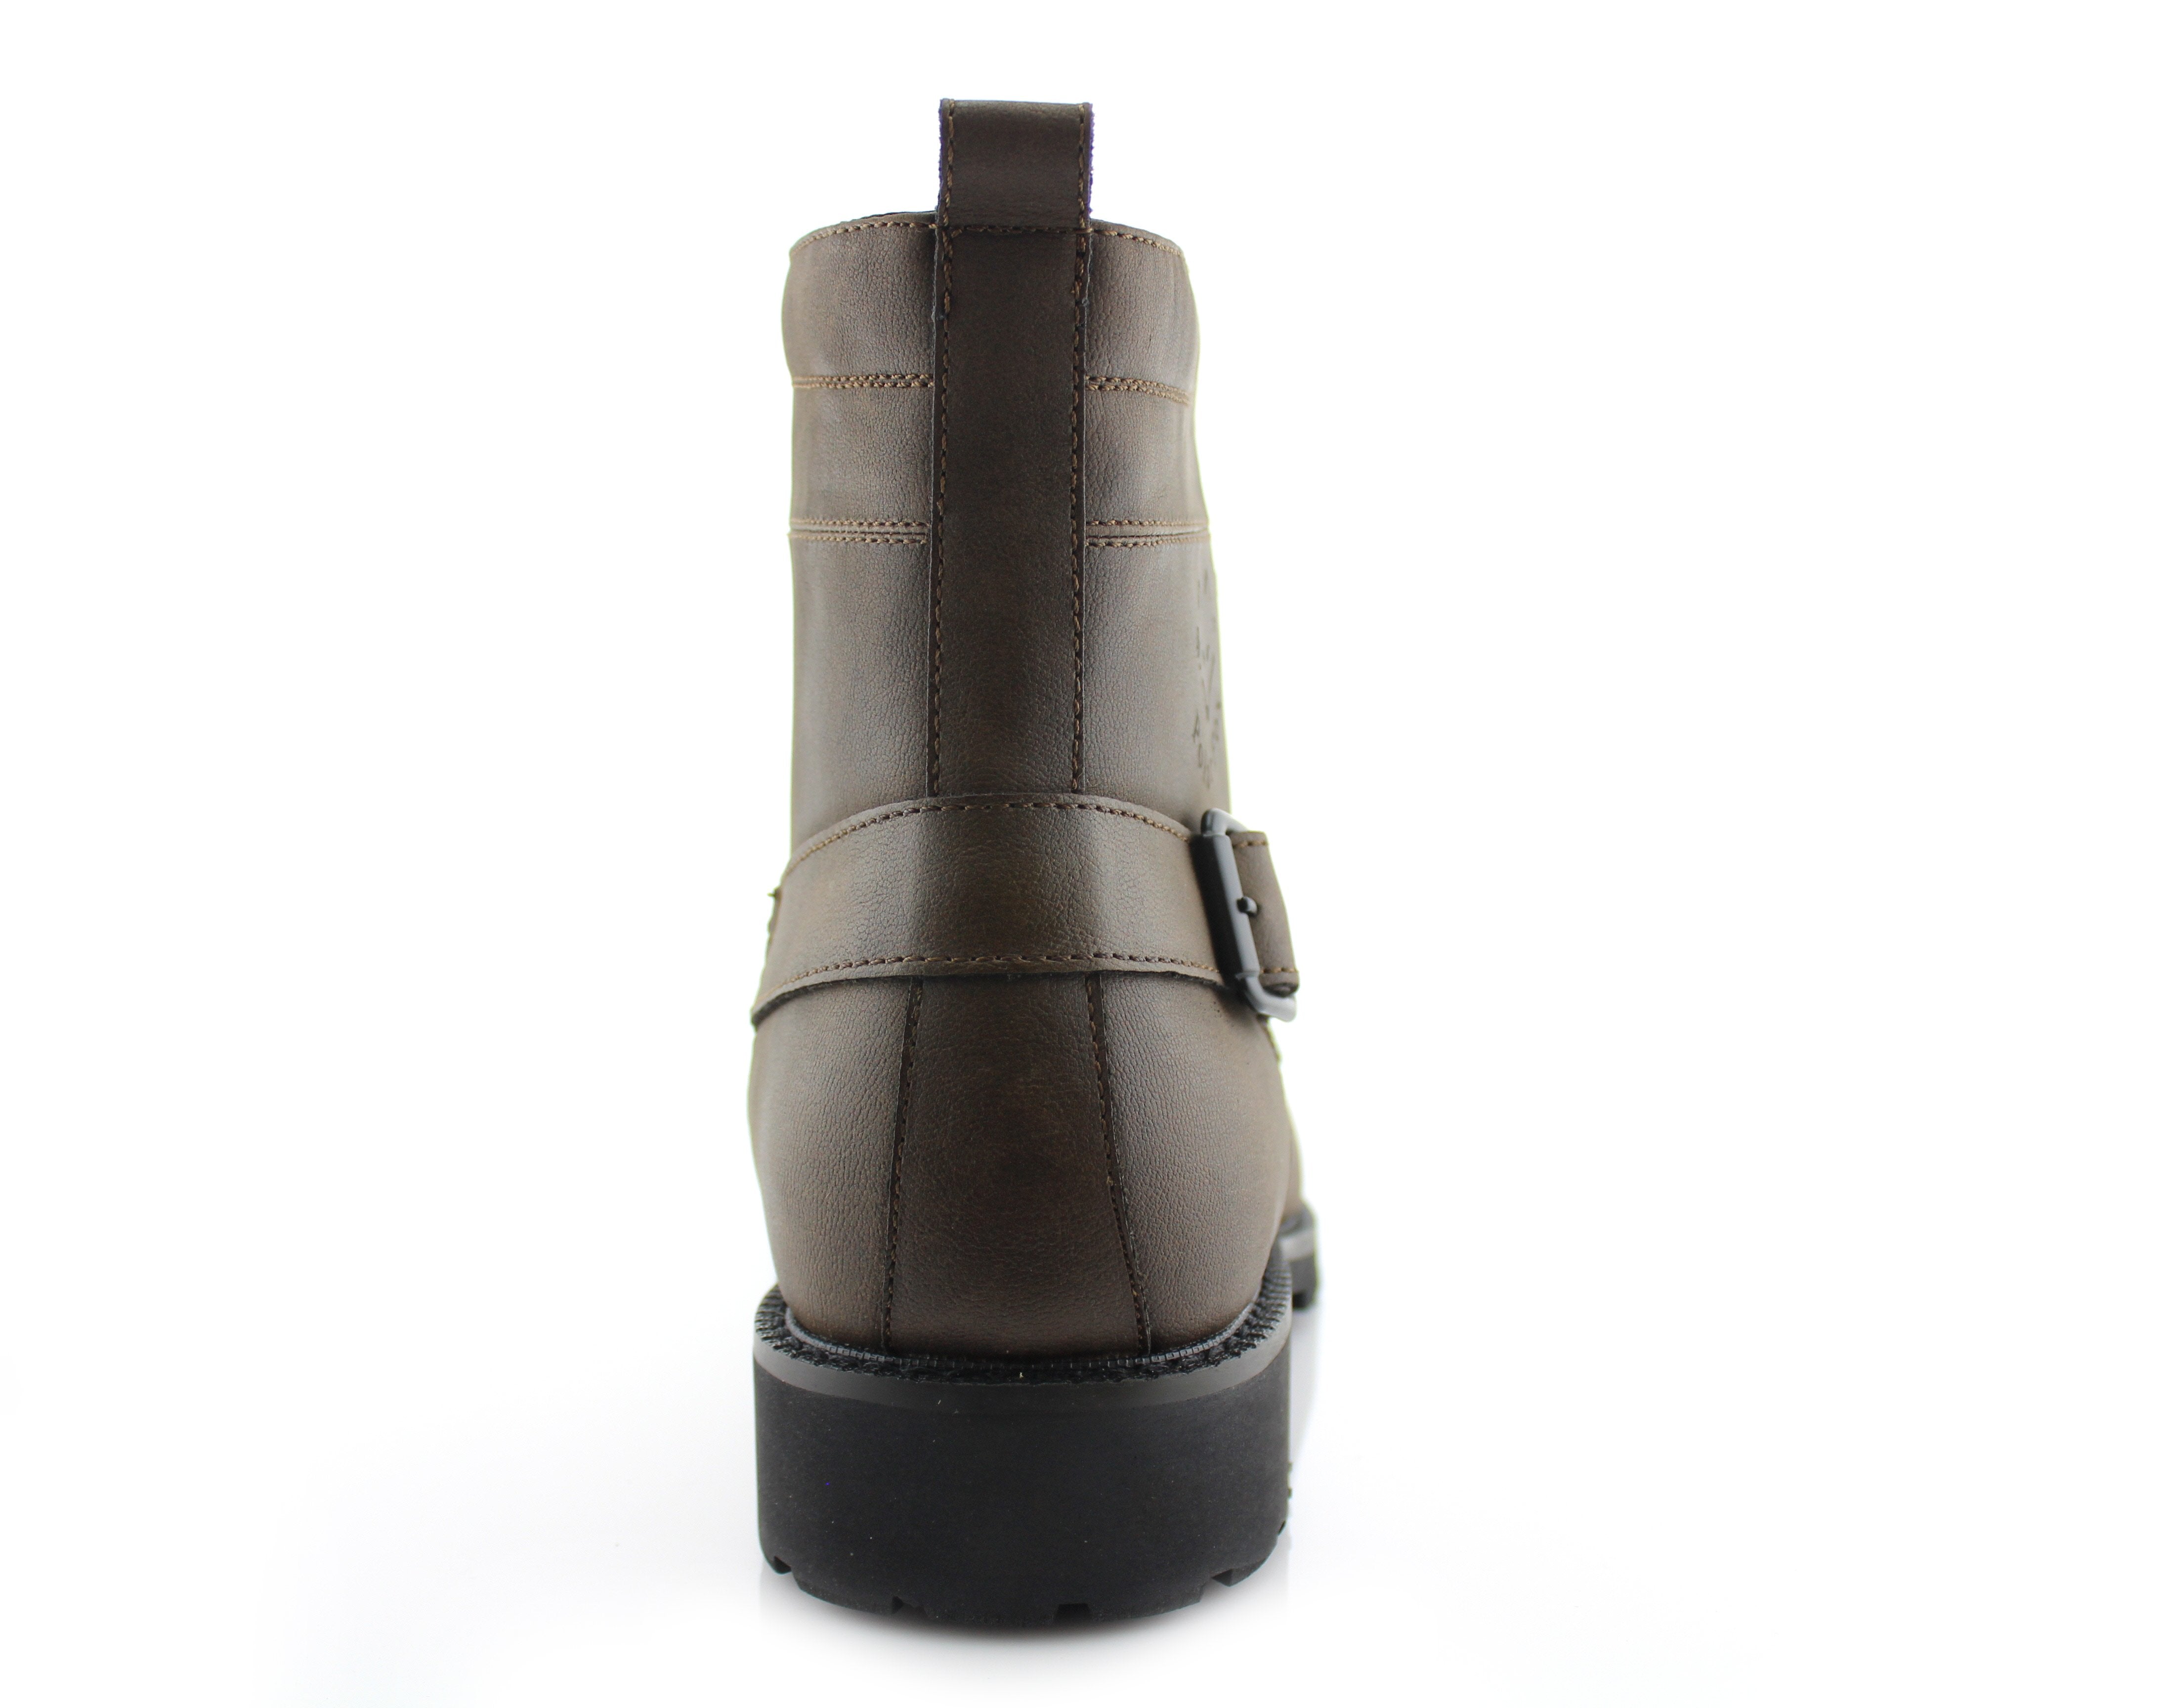 Rugged Inner Mesh Boots | Fabian by Polar Fox | Conal Footwear | Back Angle View